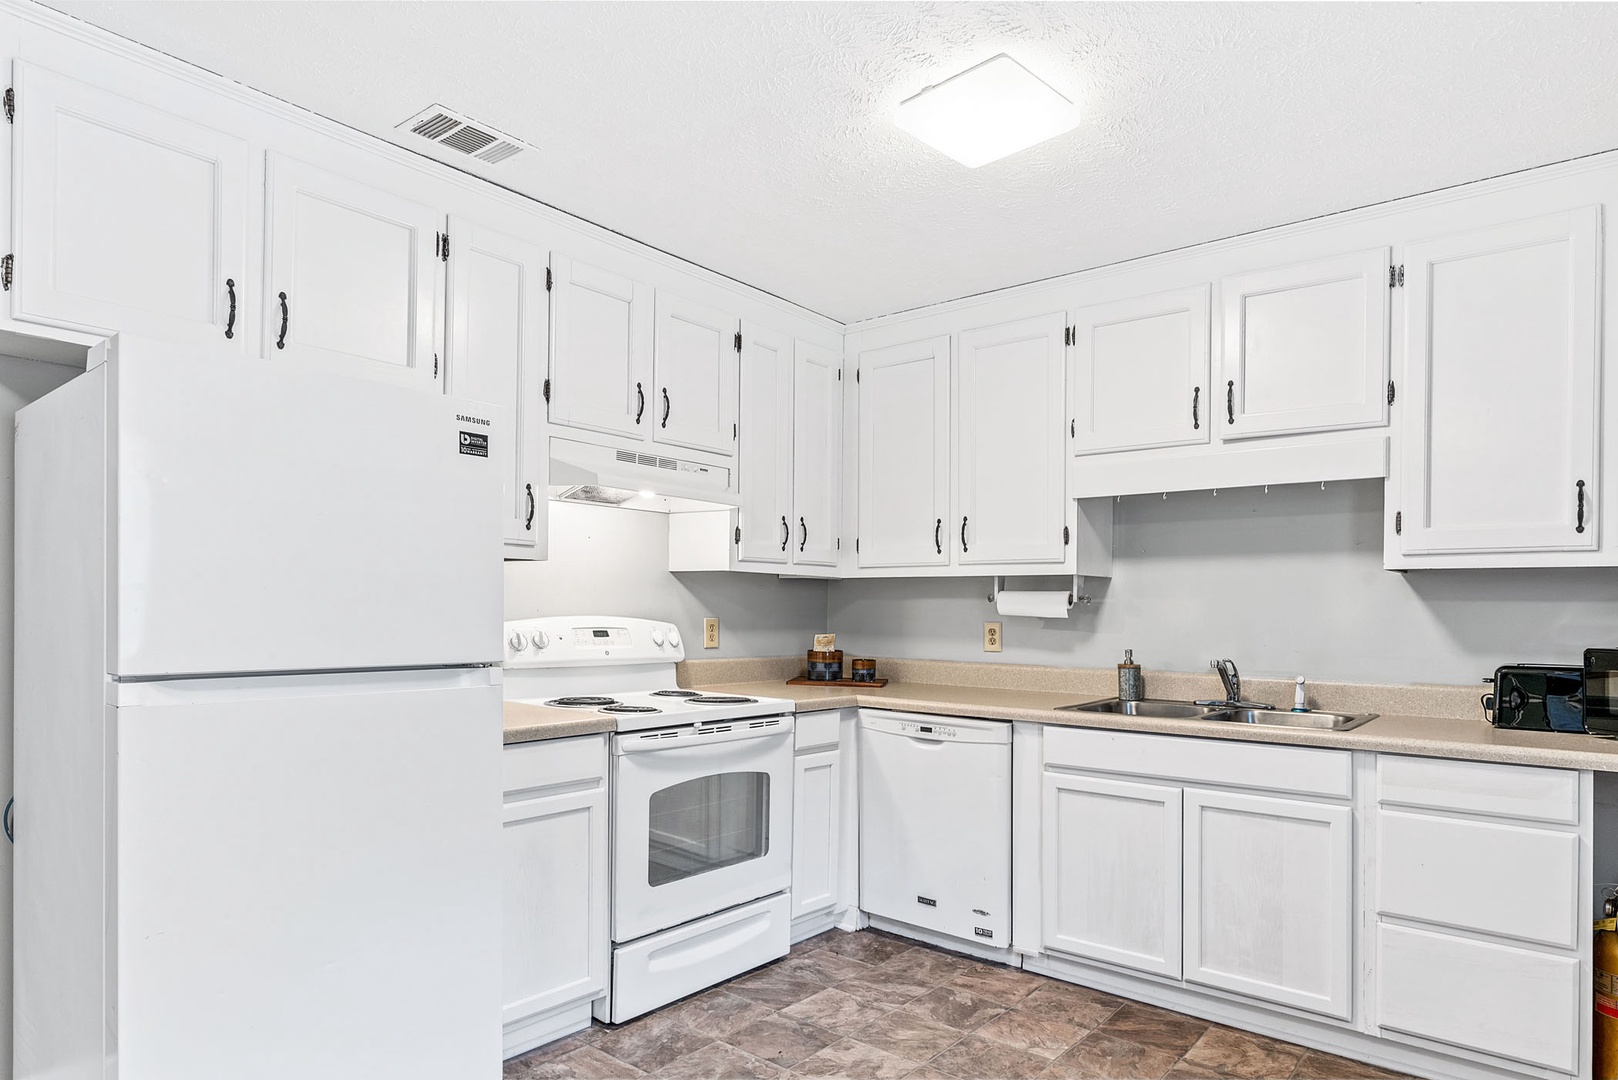 The sunny kitchen offers ample storage space & great amenities